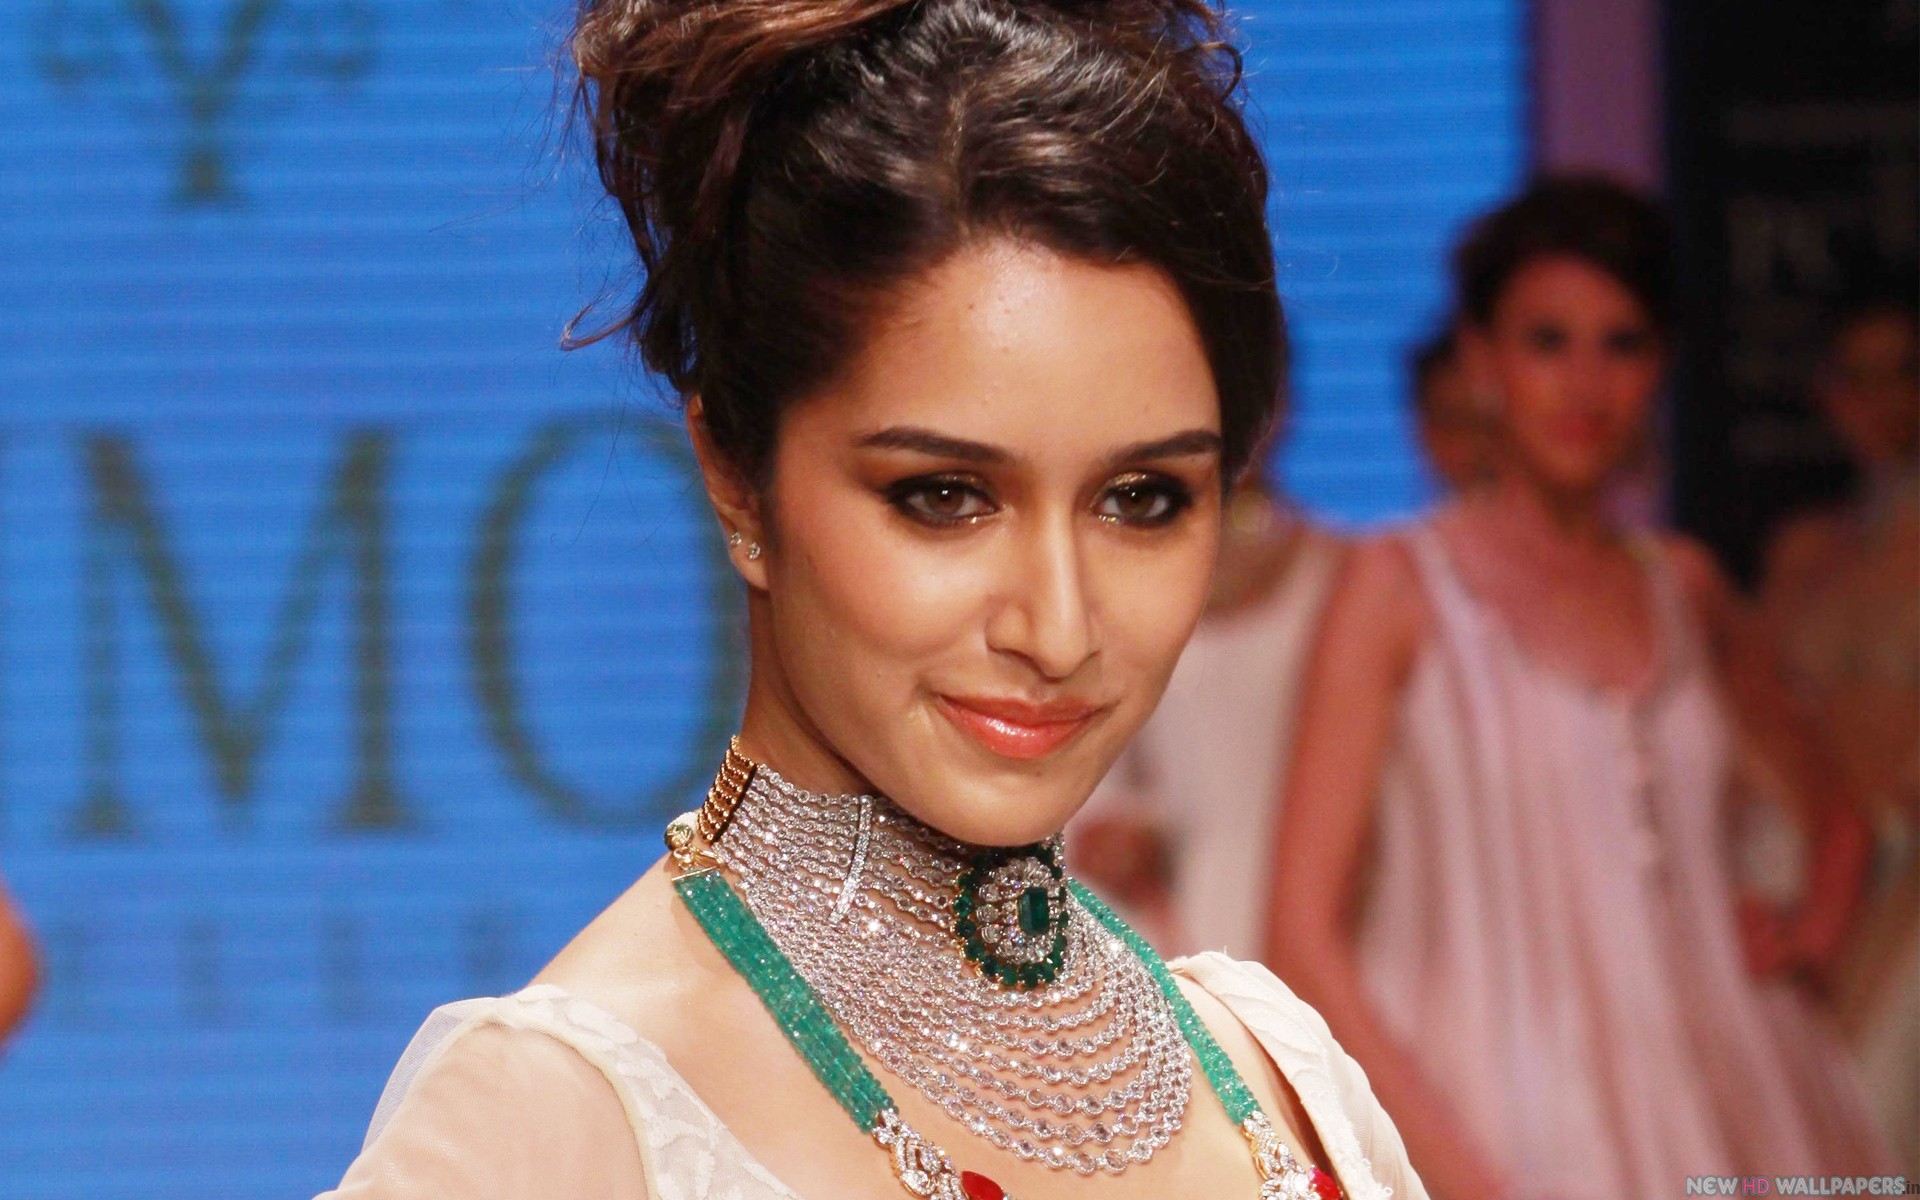 Amazing Shraddha Kapoor Pictures & Backgrounds - Shraddha Kapoor And Tamanna Bhatia - HD Wallpaper 